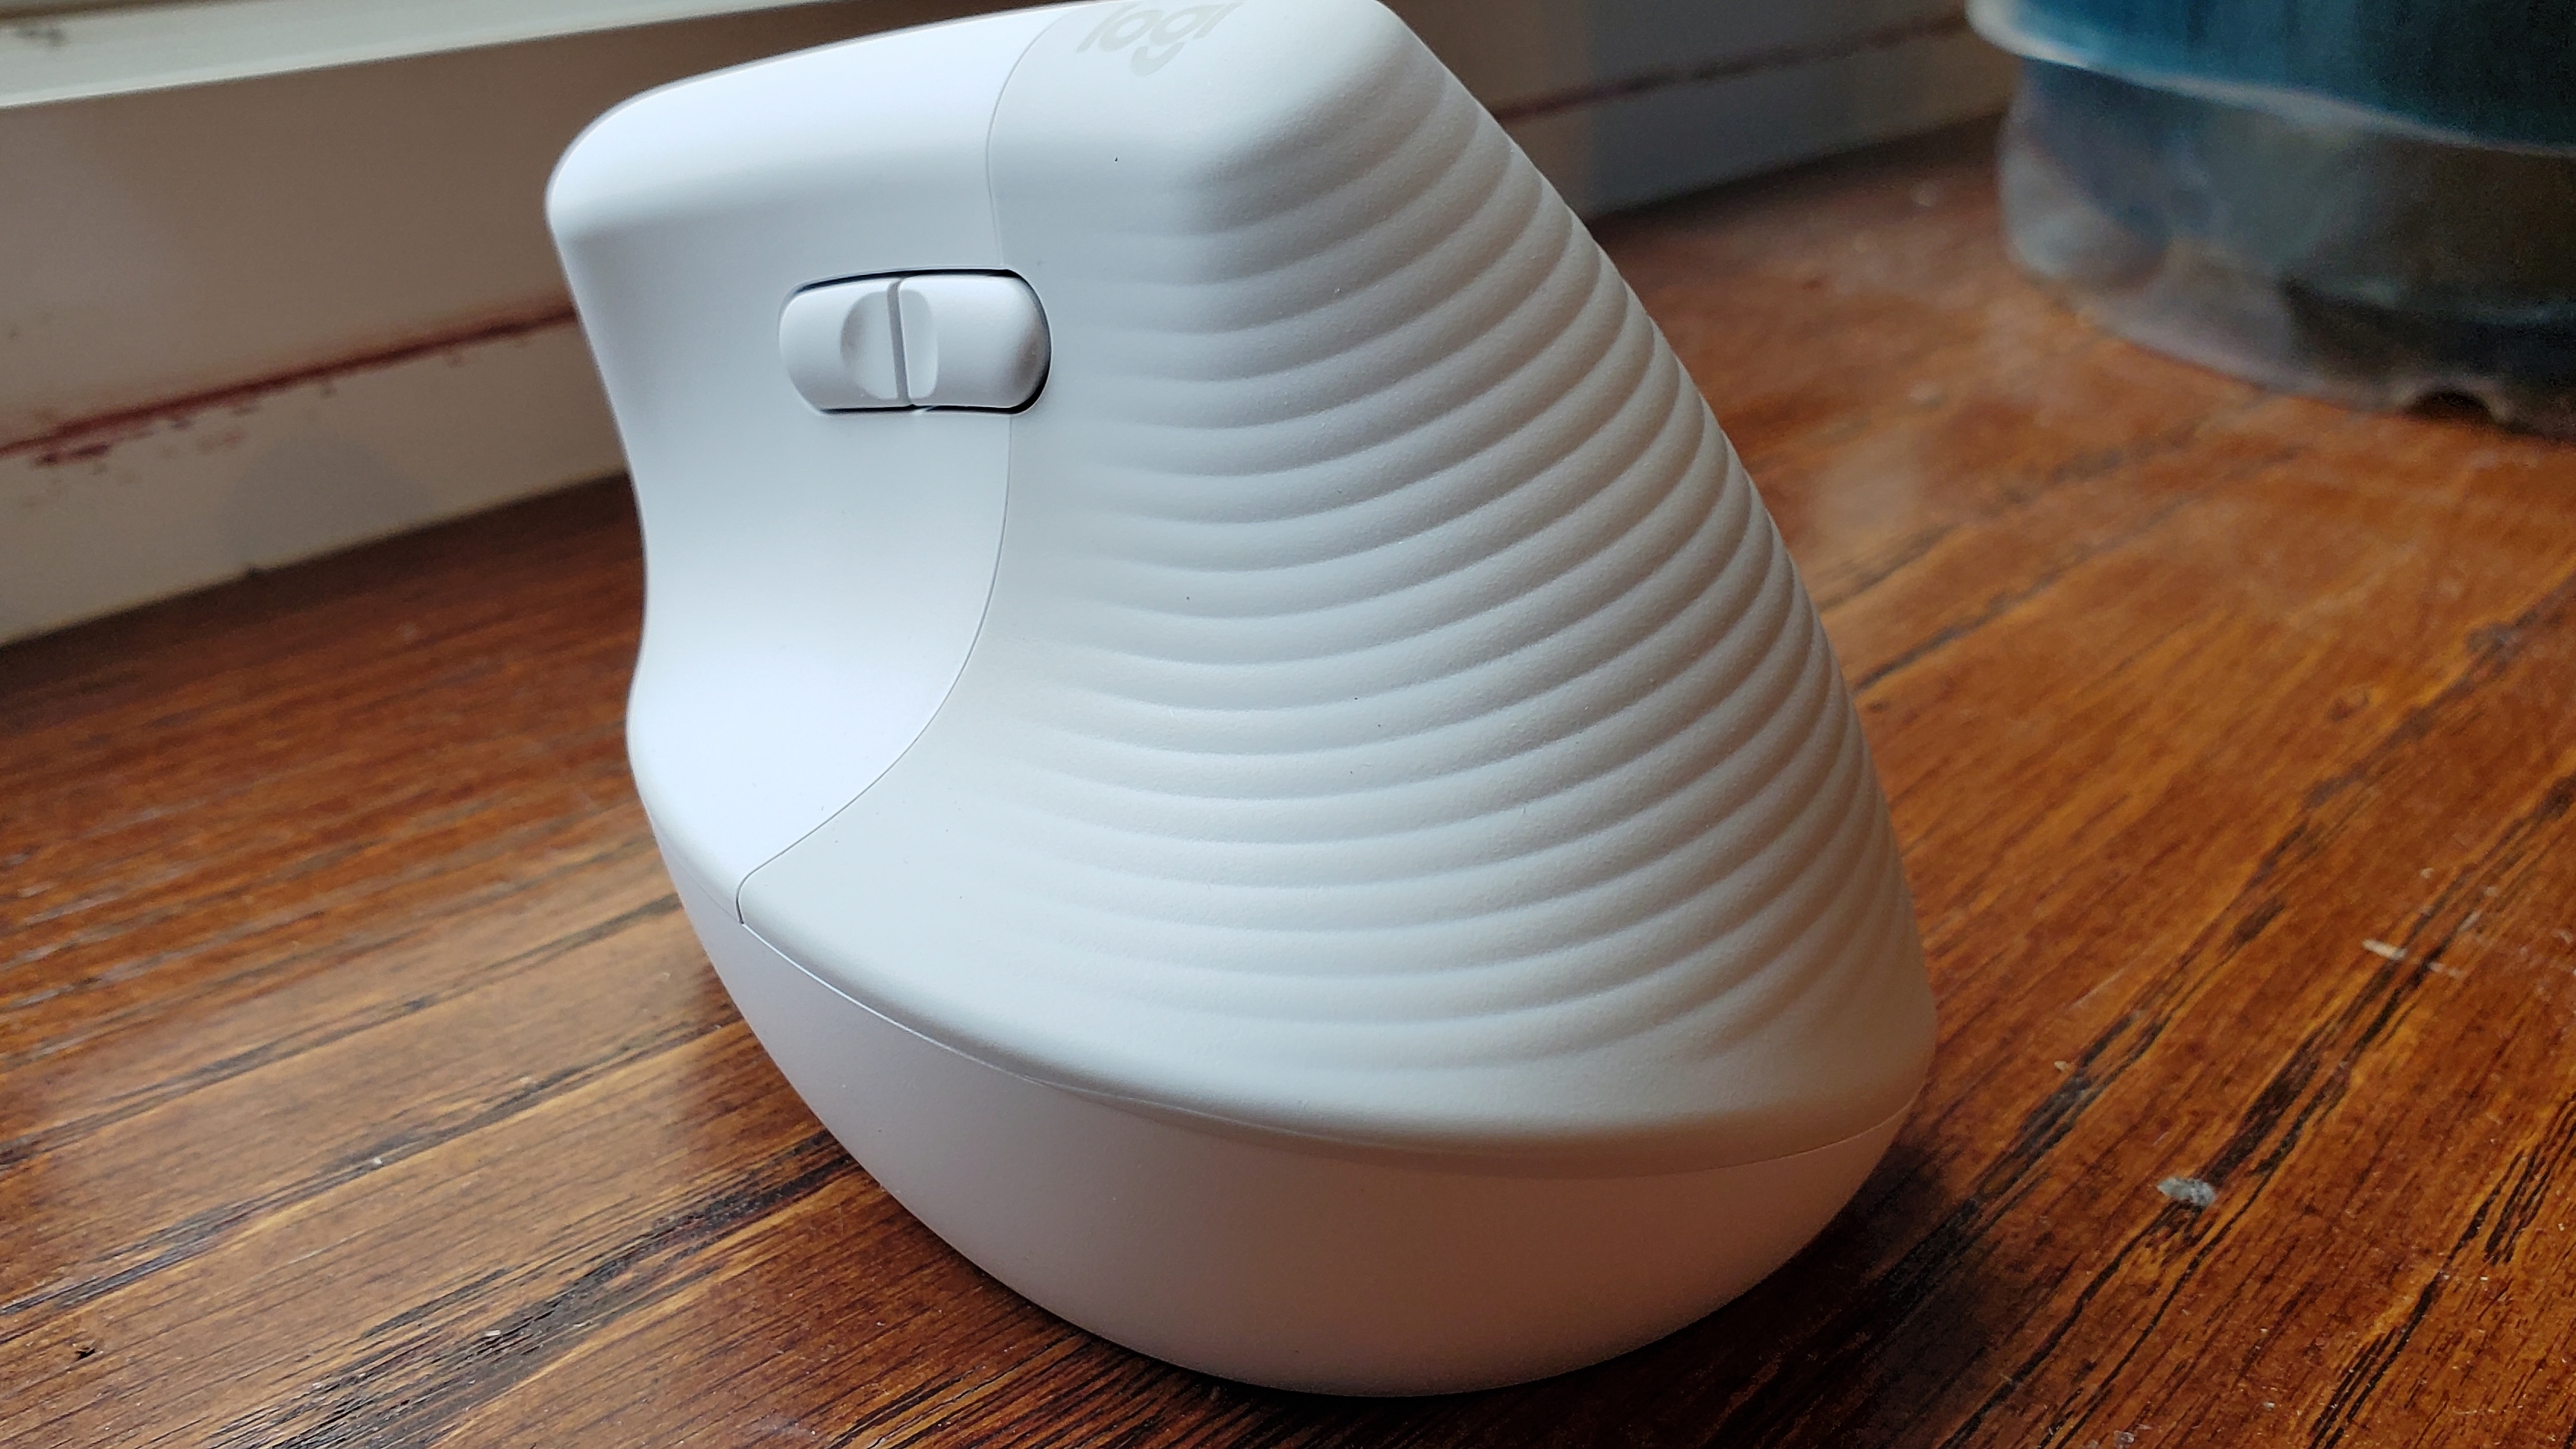 Logitech's Lift is a vertical mouse that's easier to grasp